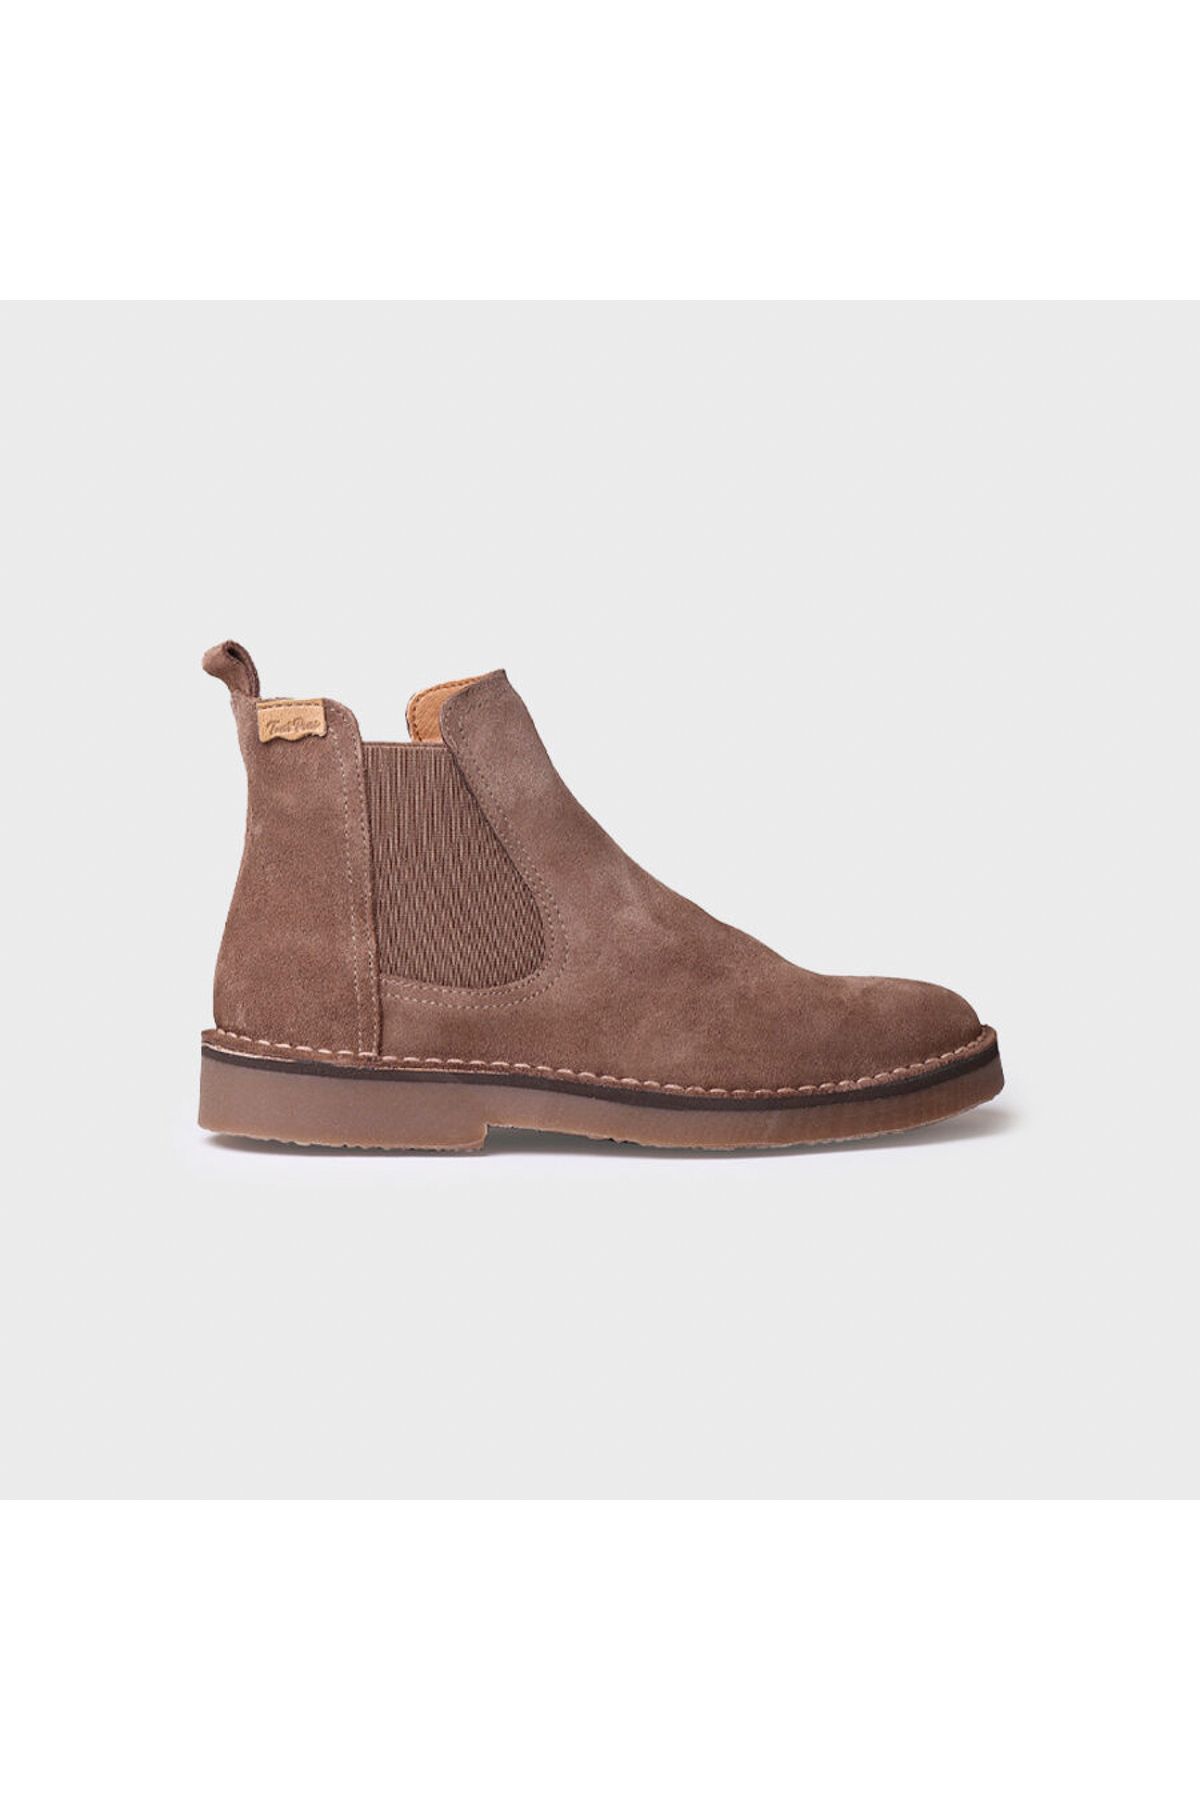 Toni Pons Kadın Bot Isa-sy Toni Pons Ankle Boot In Suede In Taupe